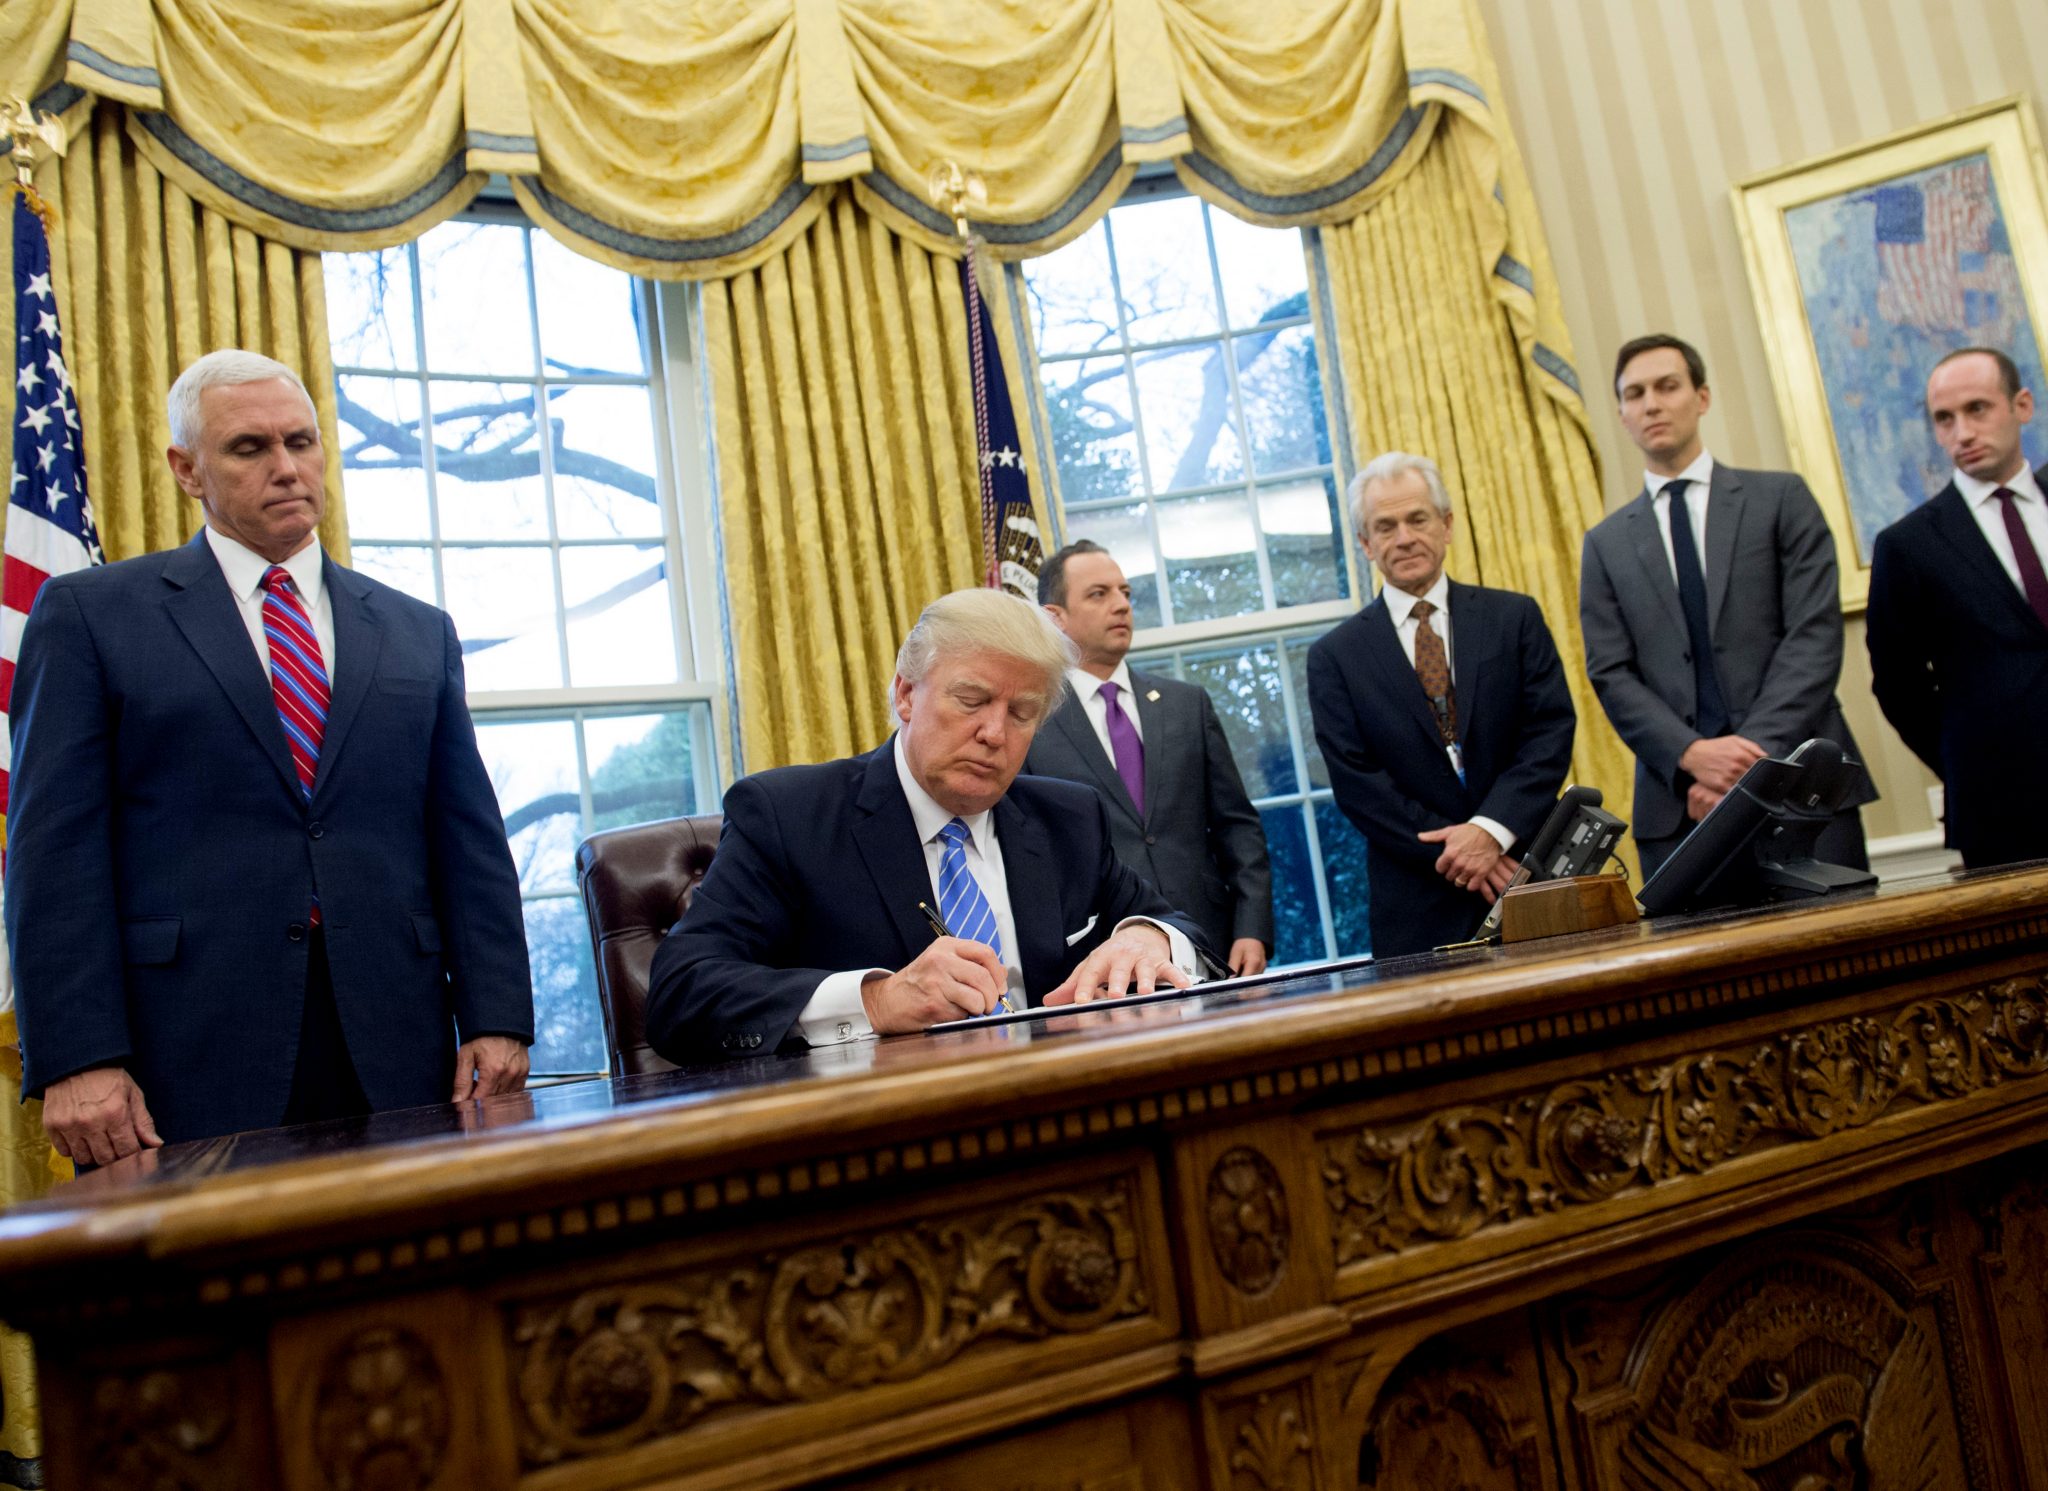 (FILES) This file photo taken on January 23, 2017 shows US President Donald Trump signing an executive order alongside White House Chief of Staff Reince Priebus (C), US Vice President Mike Pence (L), National Trade Council Advisor Peter Navarro (3rd R), Senior Advisor Jared Kushner (2nd R) and Senior Policy Advisor Stephen Miller in the Oval Office of the White House in Washington, DC, January 23, 2017.   The Trump administration's top trade advisor said on March 6, 2017 US trade deficits are a threat to national security that could cause the loss of American freedom and prosperity. Outlining an unapologetically aggressive trade policy, Peter Navarro, director of the White House National Trade Council, accused economists and the media of ignoring the risk posed by trade deficits and embracing an "antiquated view of the world."  / AFP PHOTO / SAUL LOEB